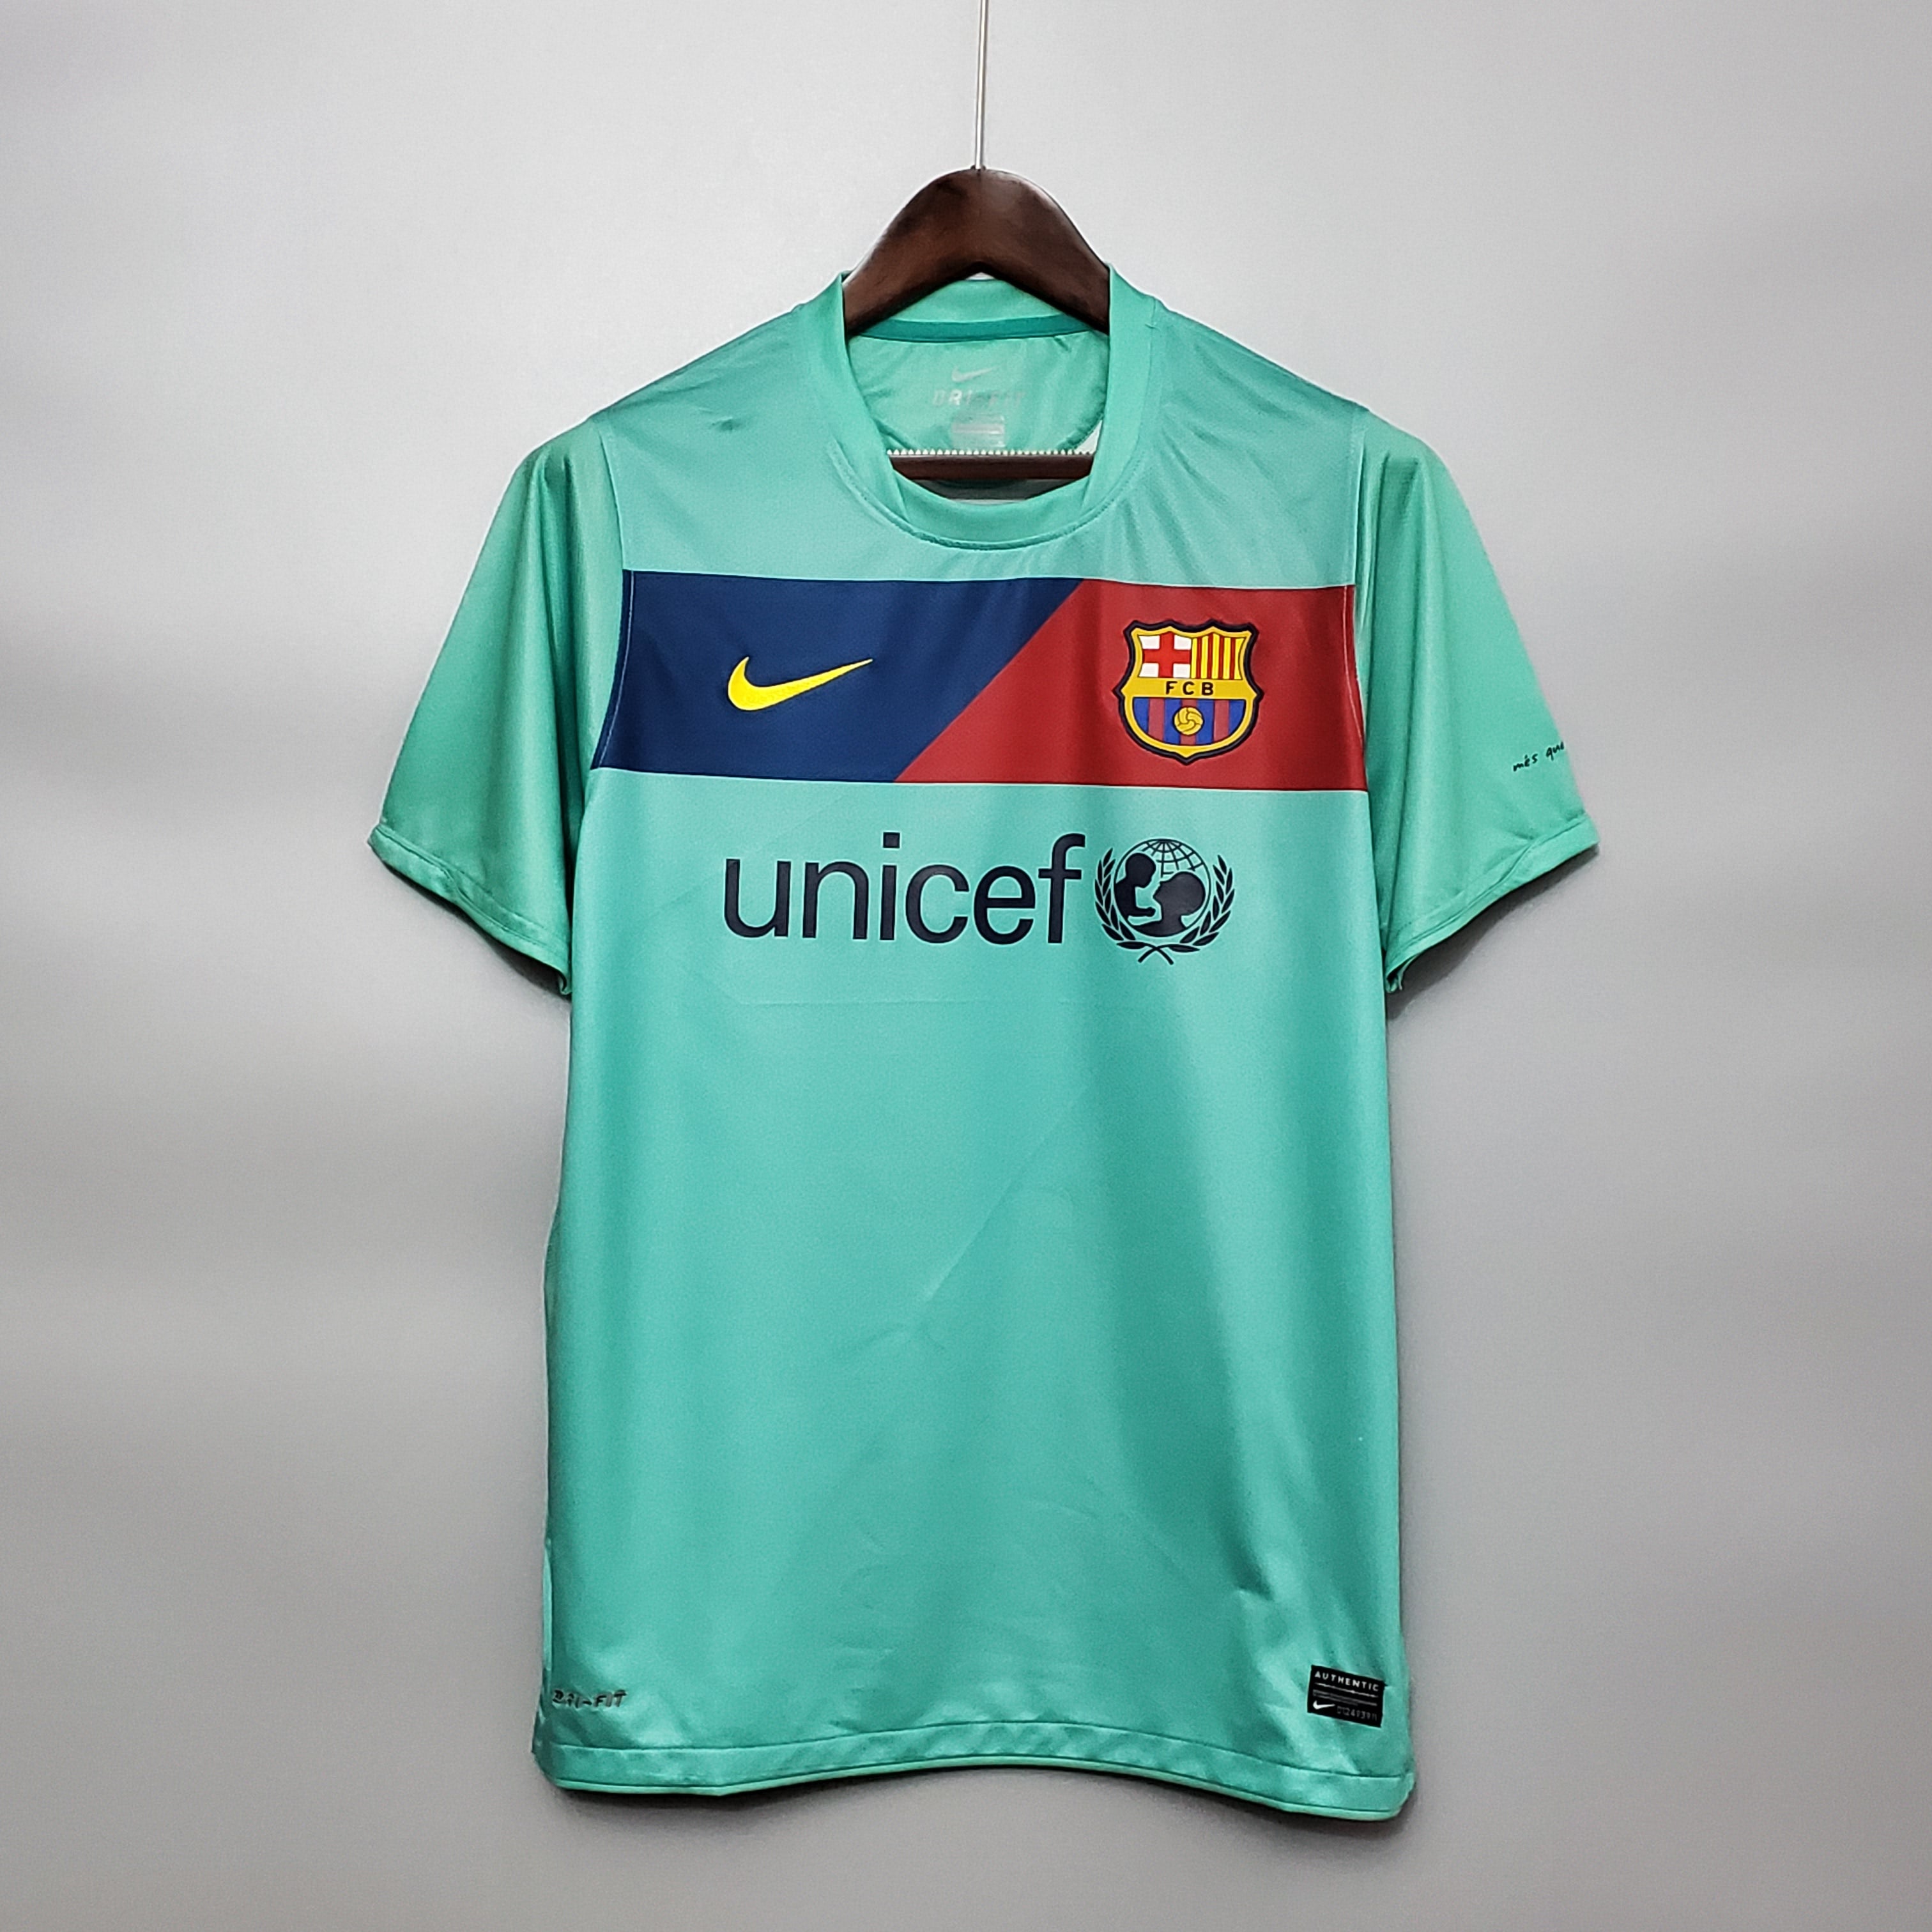 Where can i buy this kit? 2011/12 Barca : r/Barca